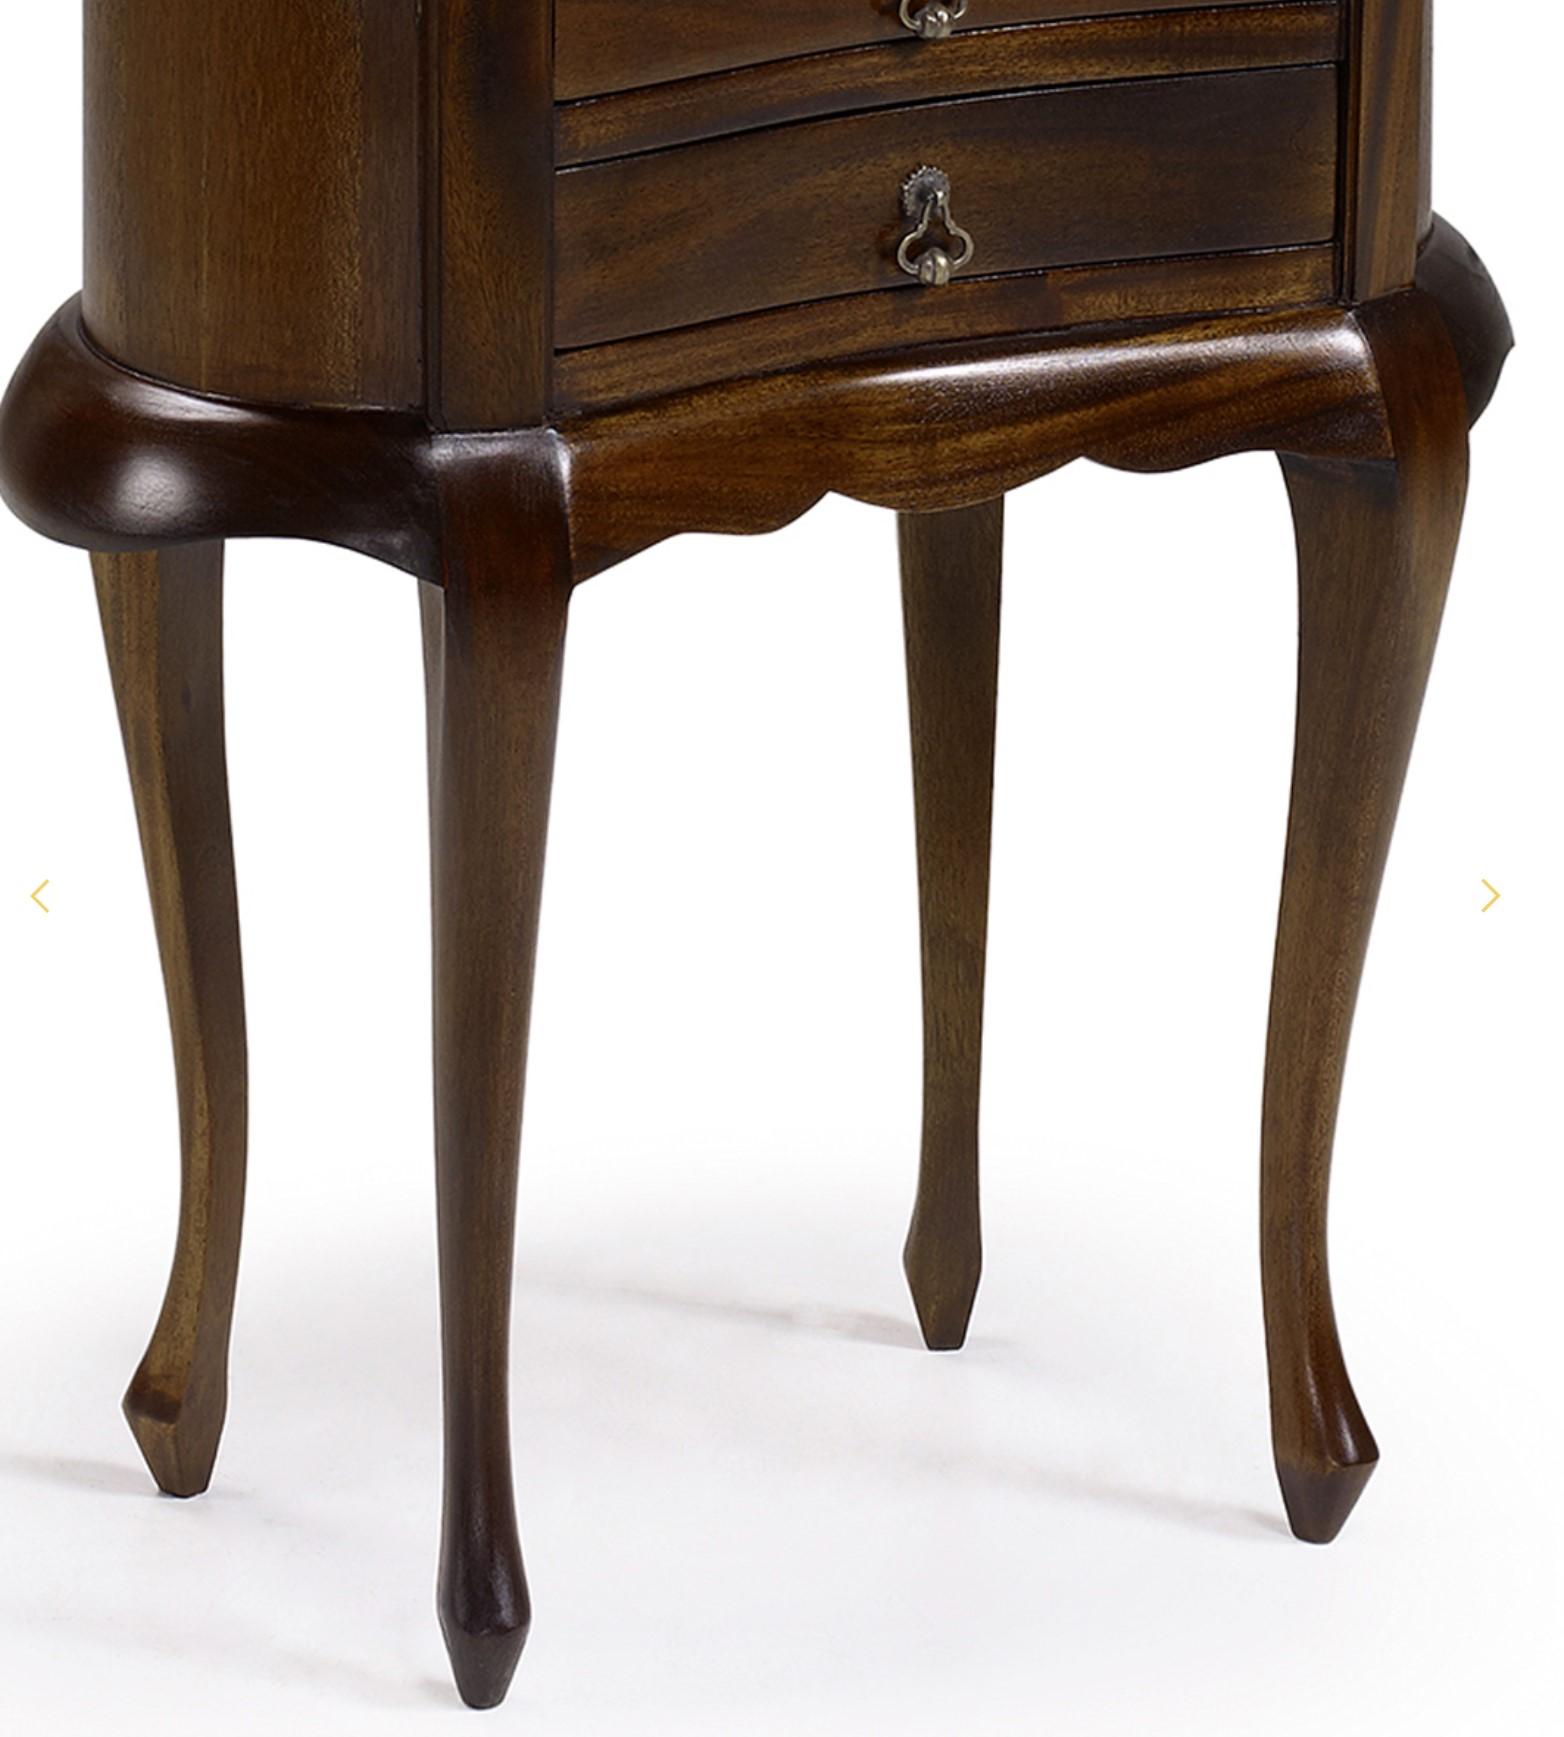 20th Century Pair of Mahogany Nightstands with Kidney Shape and Two Drawers In Good Condition For Sale In Miami, FL